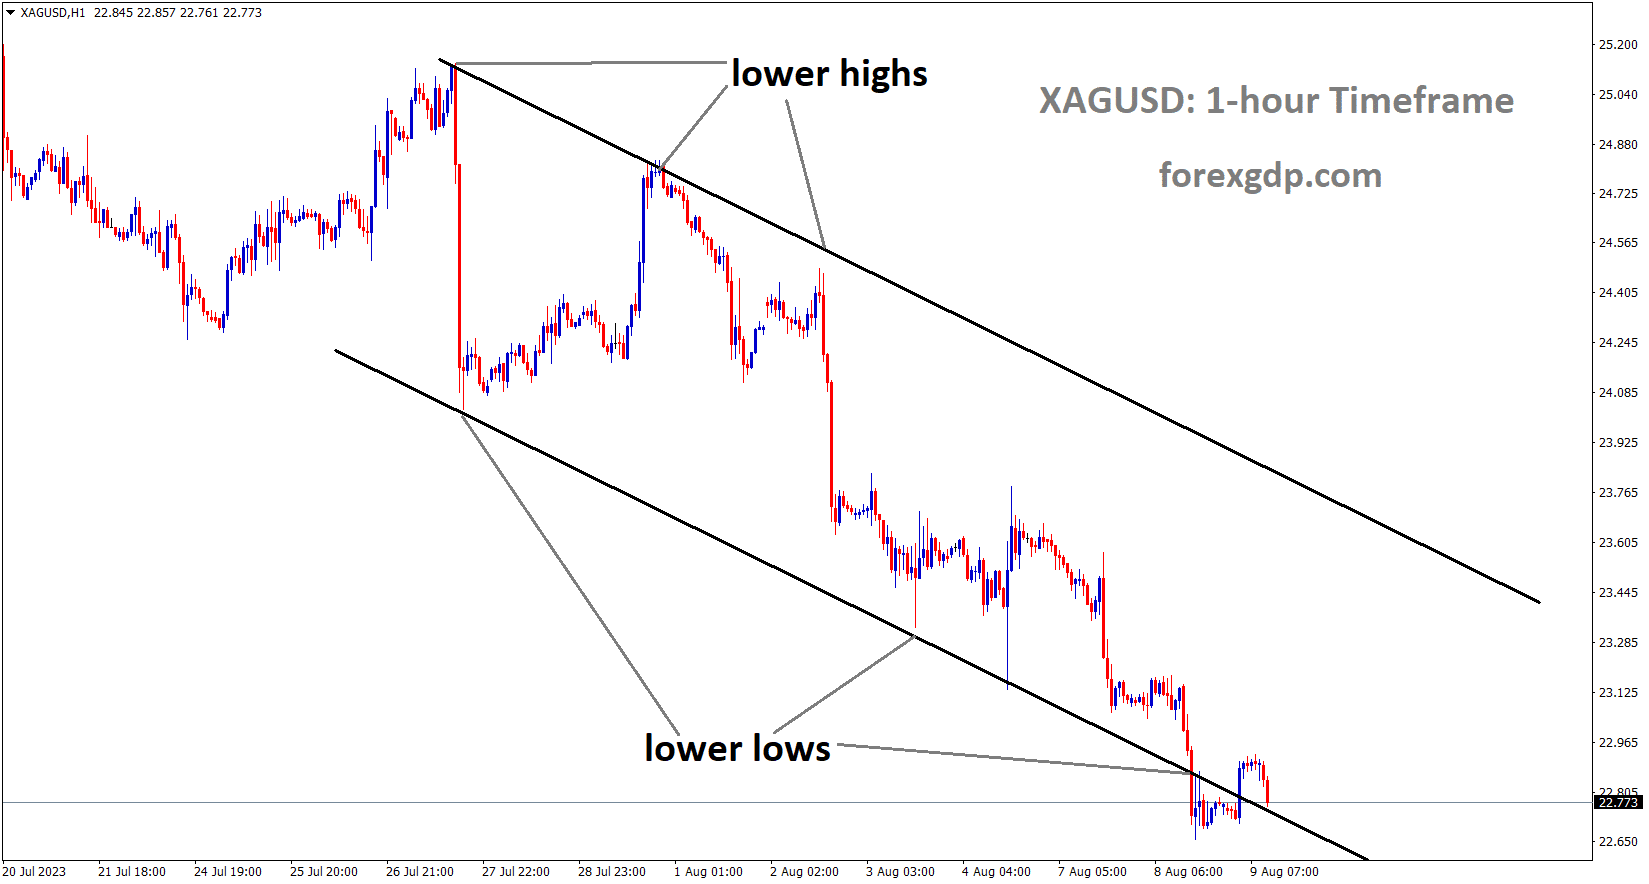 XAGUSD Silver Price is moving in the Descending channel and the market has reached the lower low area of the channel